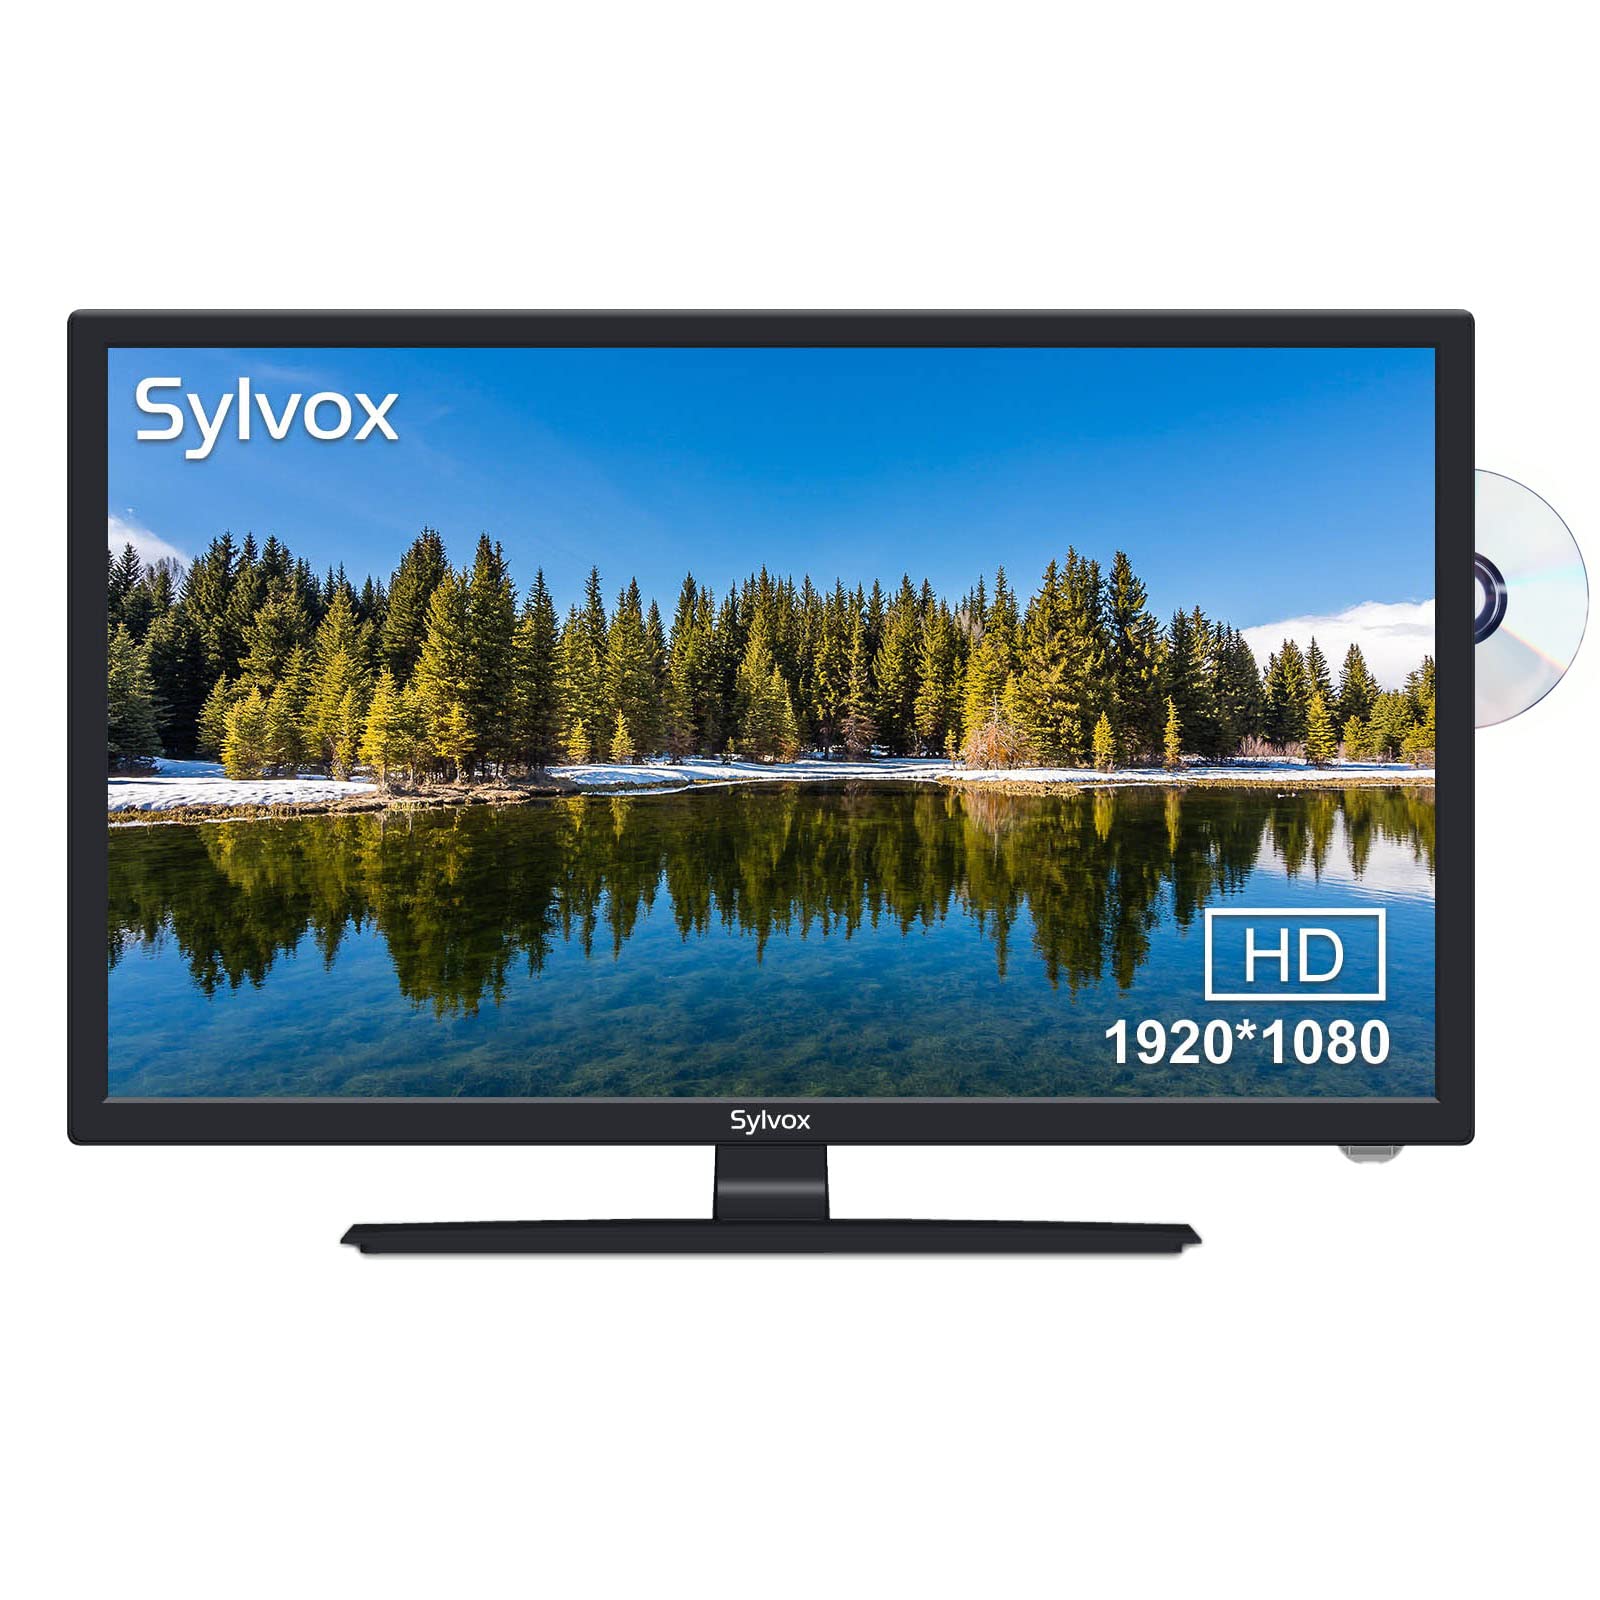 SYLVOX 27 Inch TV 12/24 Volt TV Full HD RV TV,1080P,Built-in DVD Player and FM Radio, for Home, RV Camper and Mobile Use